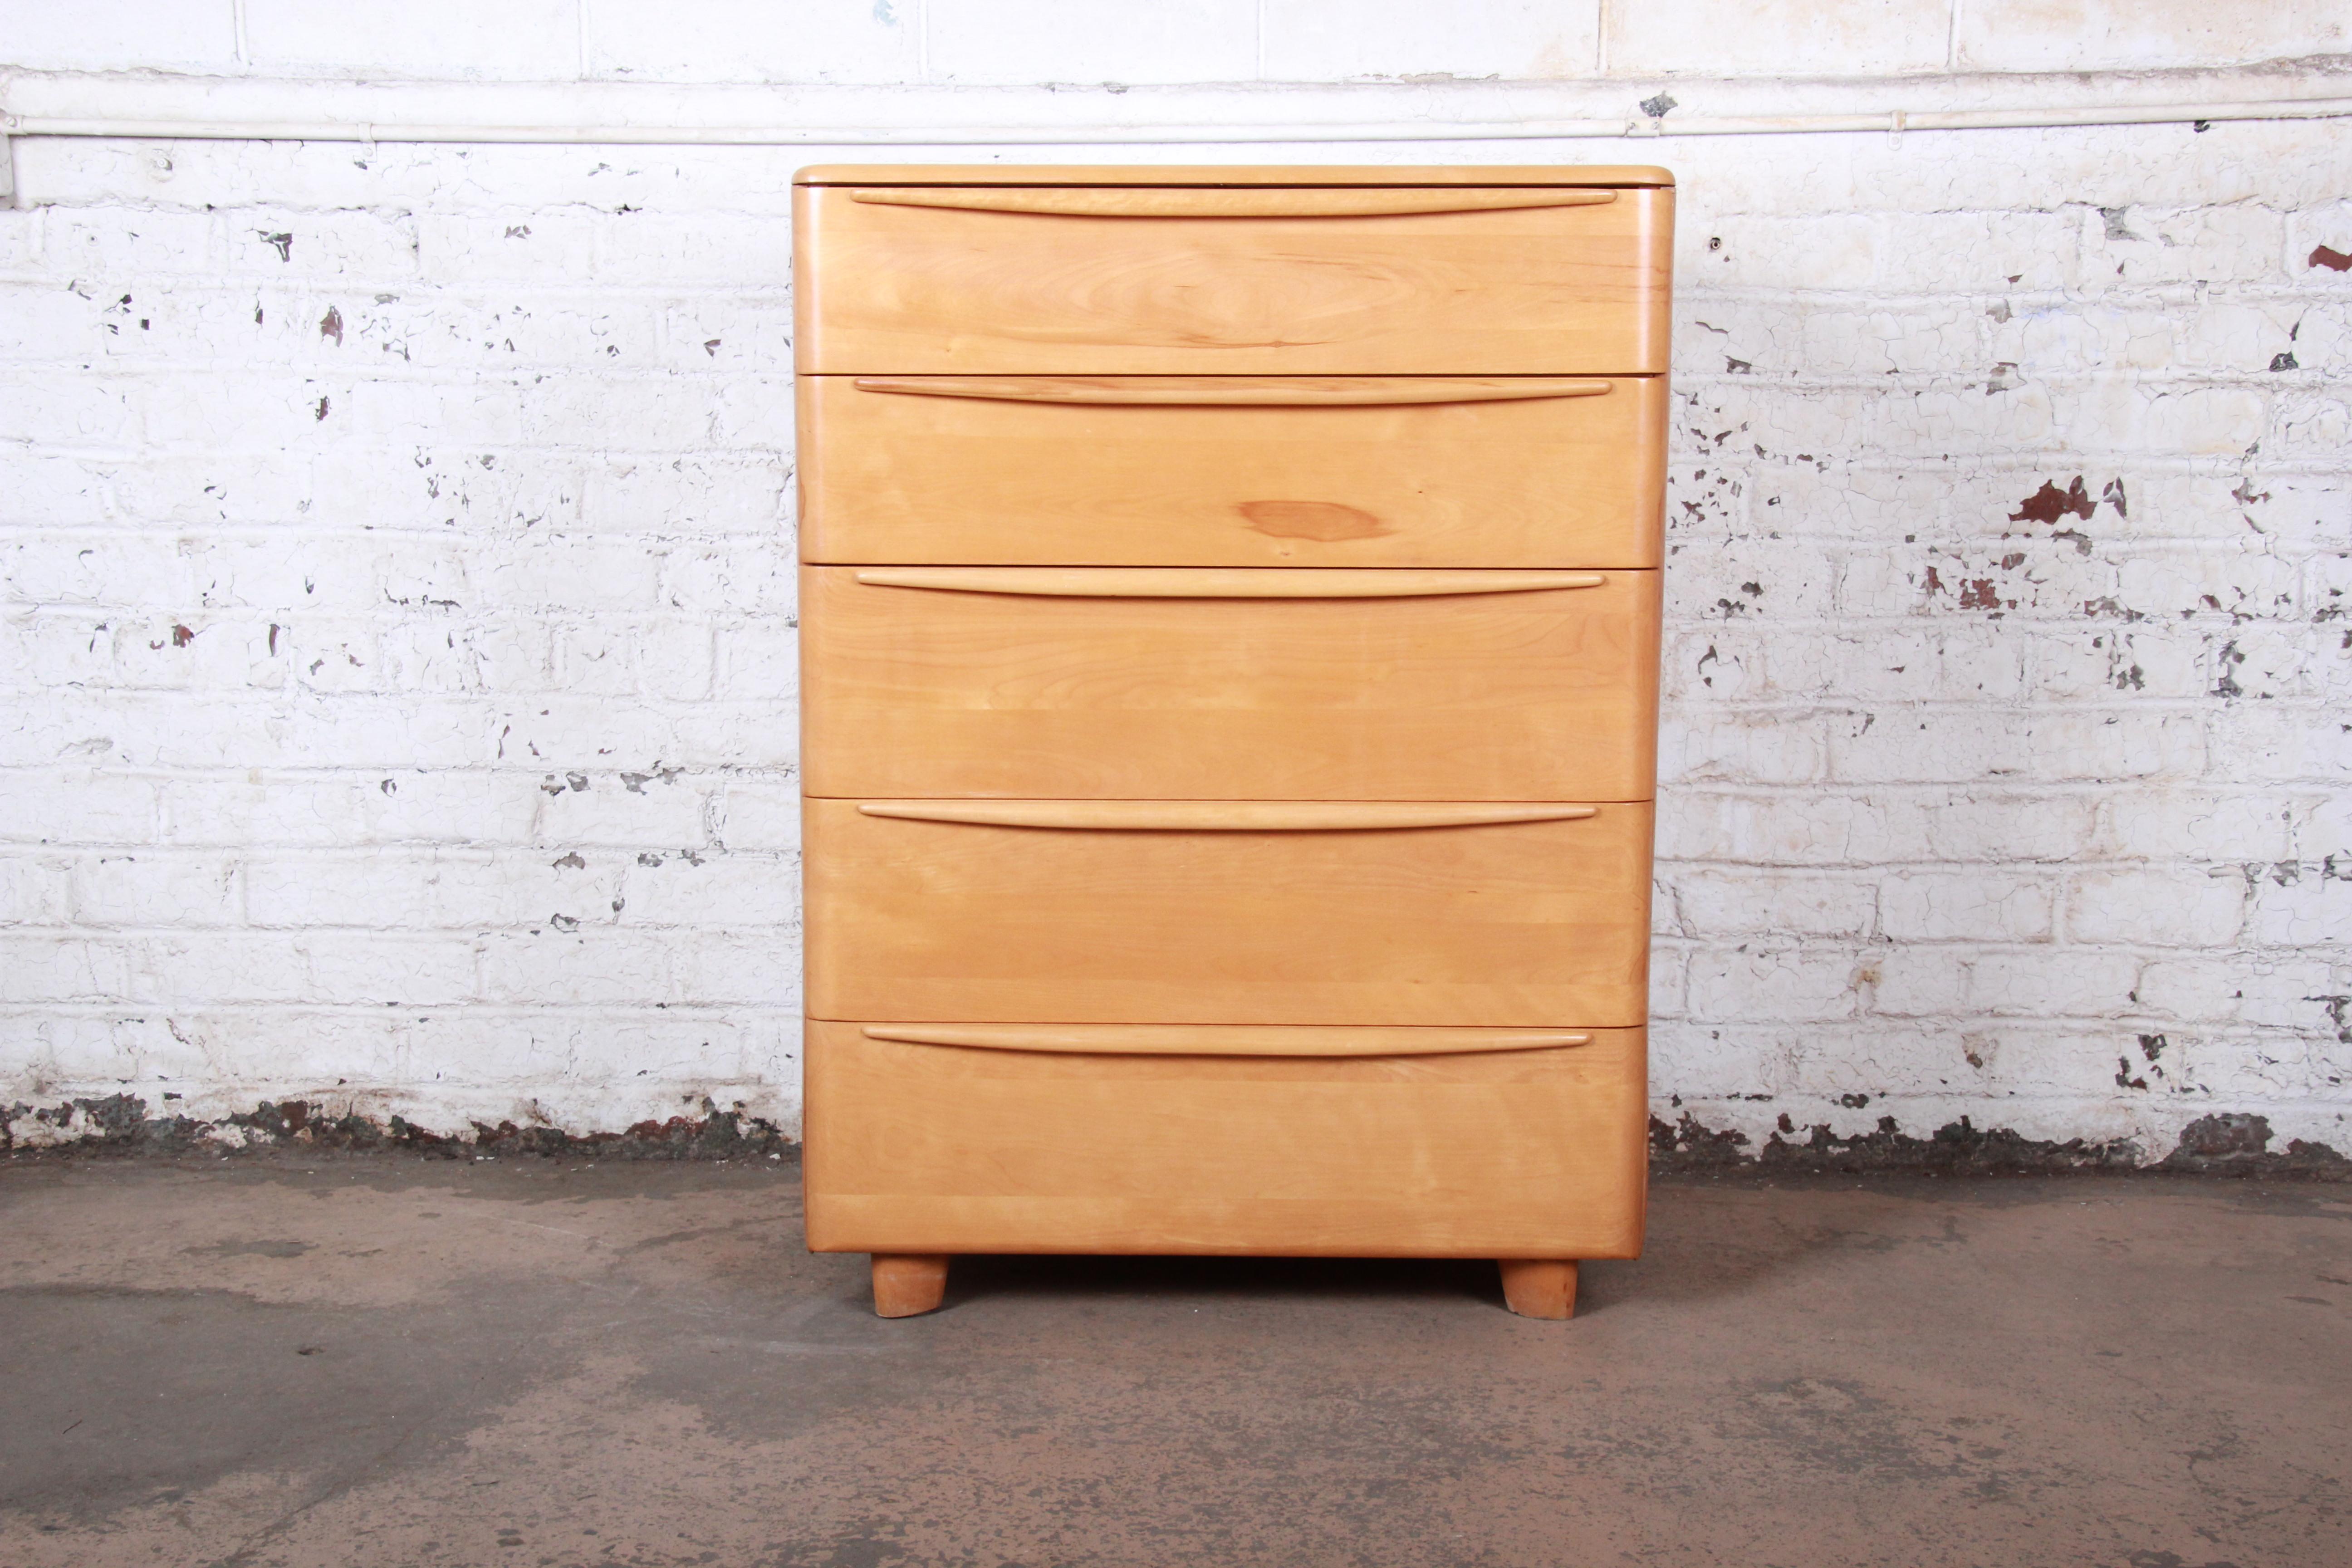 Mid-Century Modern solid maple highboy dresser

Made by Heywood-Wakefield

USA, 1950s

Measures: 34